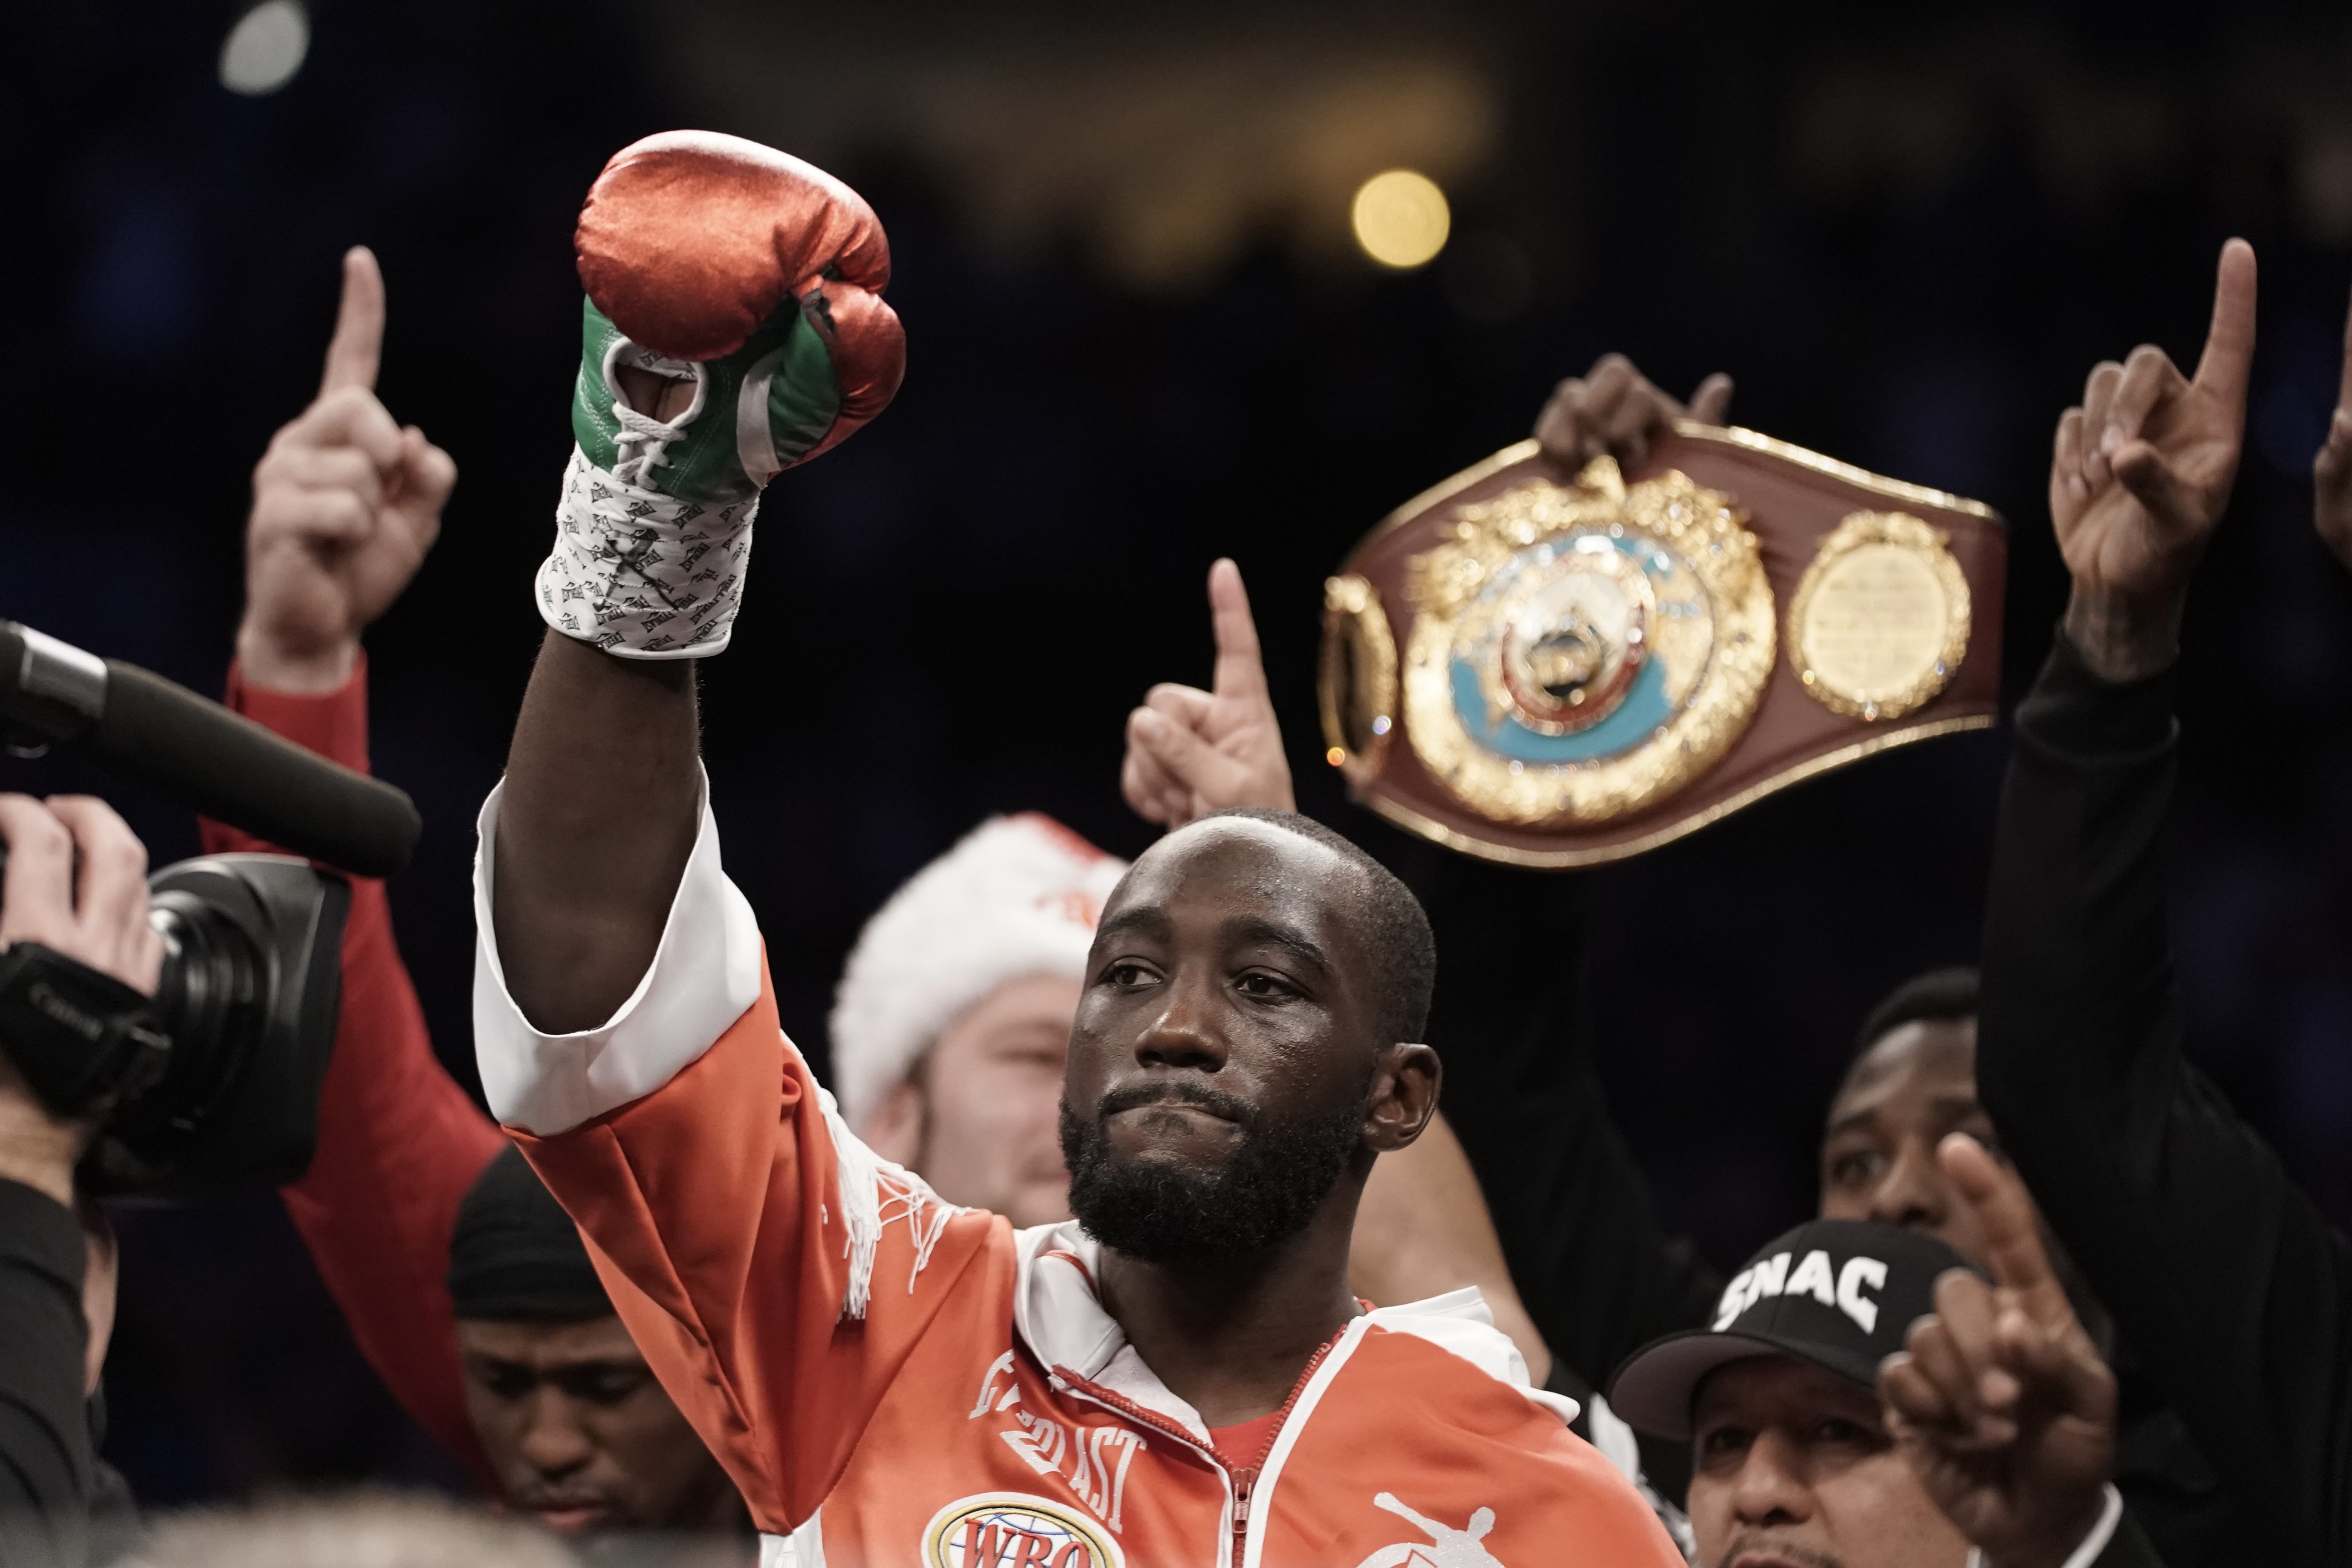 , Errol Spence vs Terence Crawford: Stream, TV channel and latest on tasty welterweight boxing bout in Las Vegas